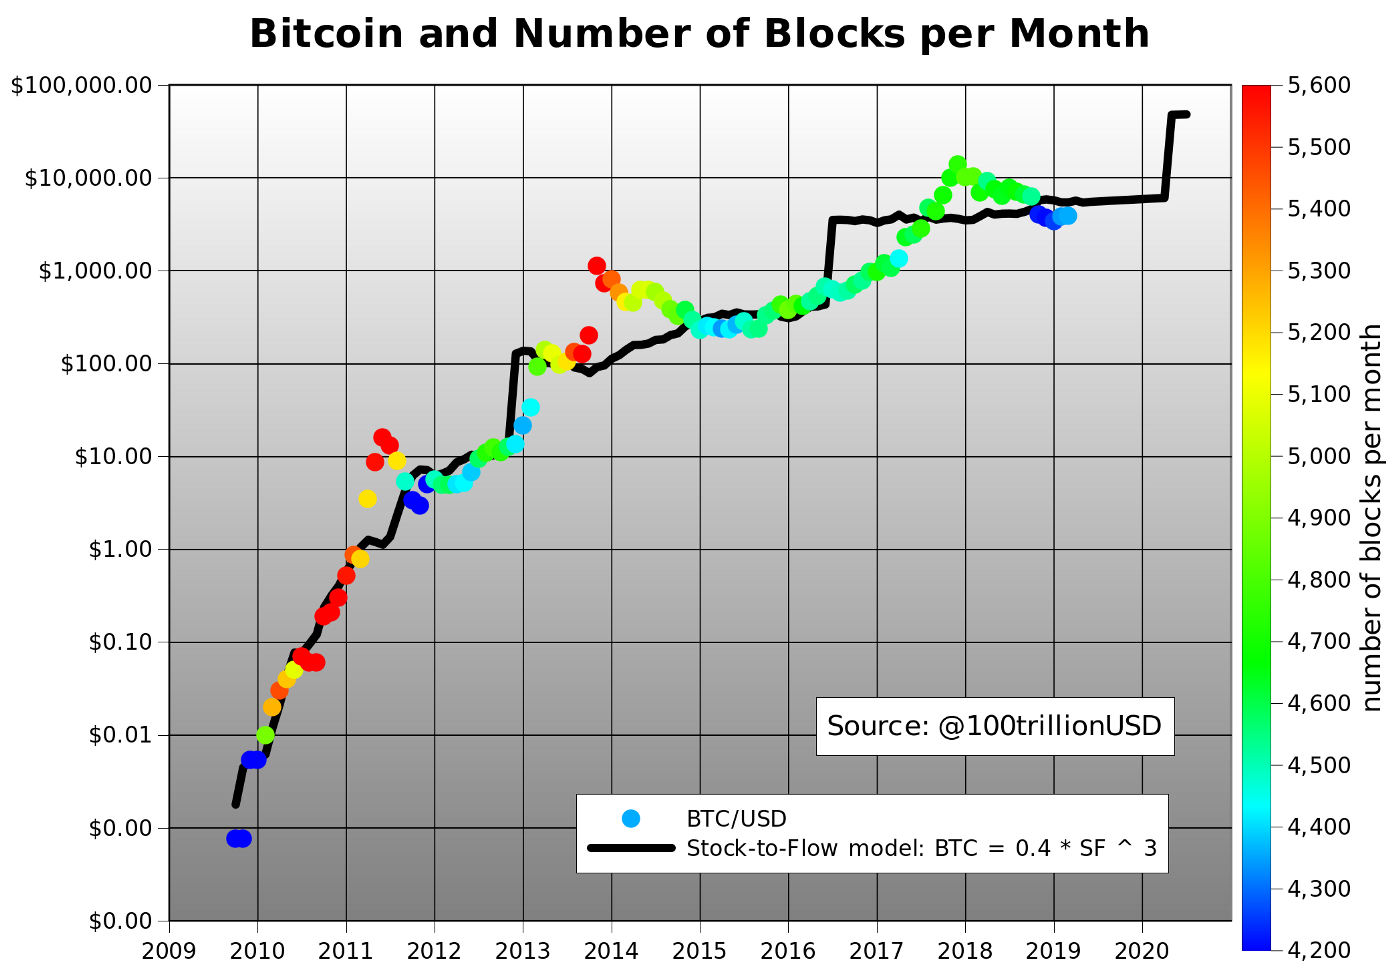 Source: Modeling Bitcoin Value with Scarcity